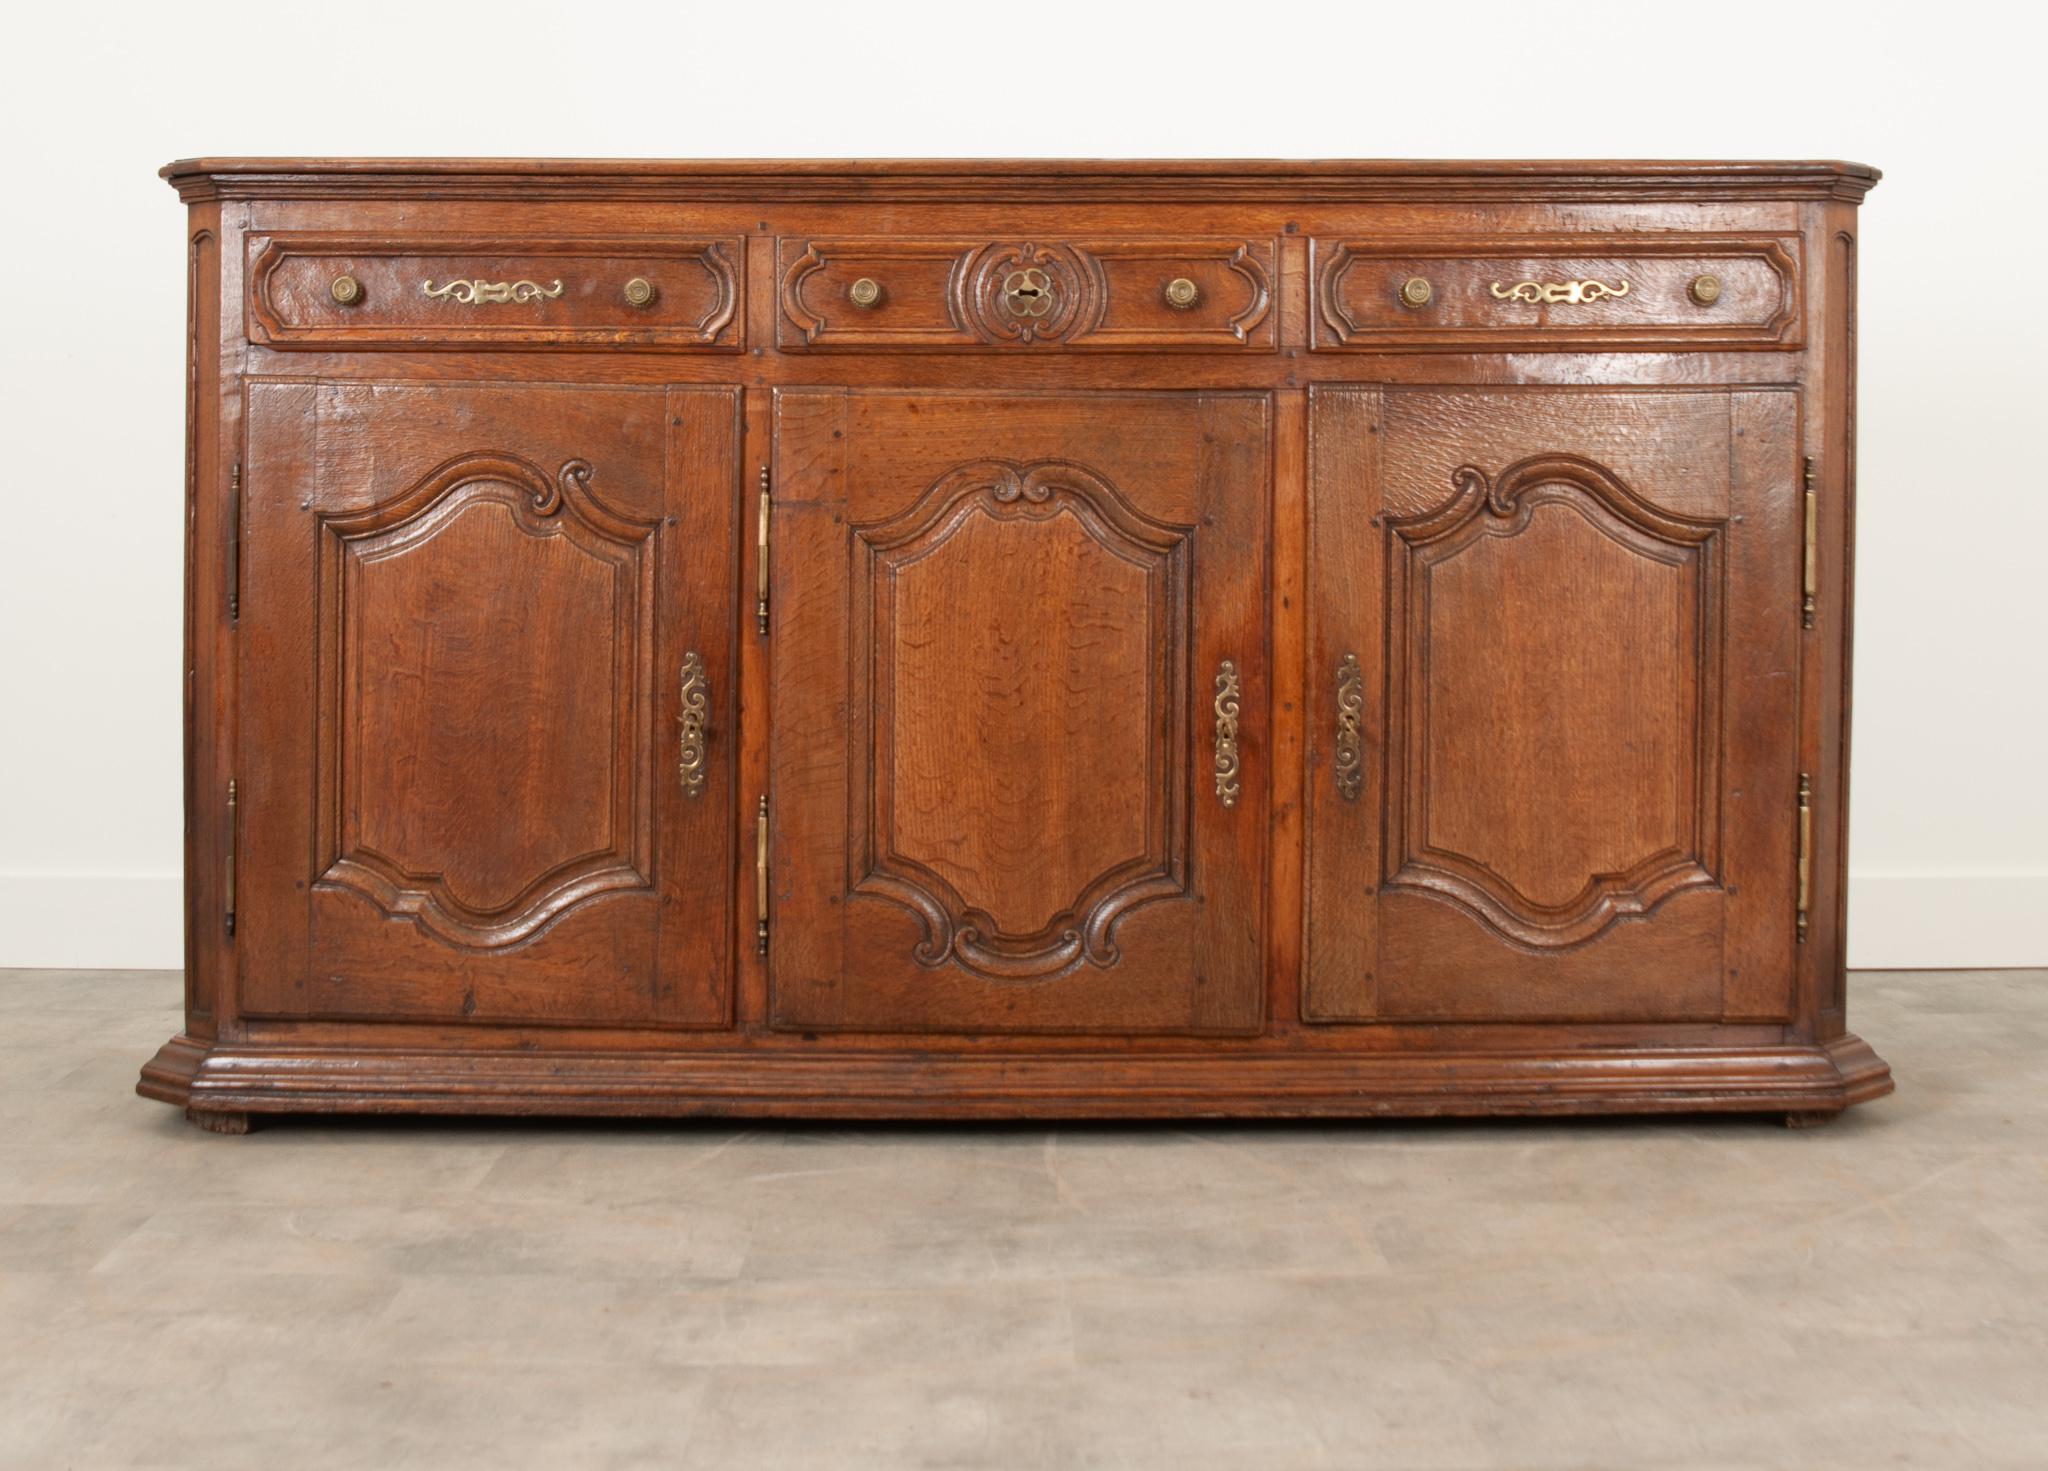 A substantial solid oak enfilade from the 1800's France. The entire case piece is made of solid carved oak and has a warm patina. All three drawers are cleaned and slide with ease using brass knobs. The paneled doors open on brass hinges to their